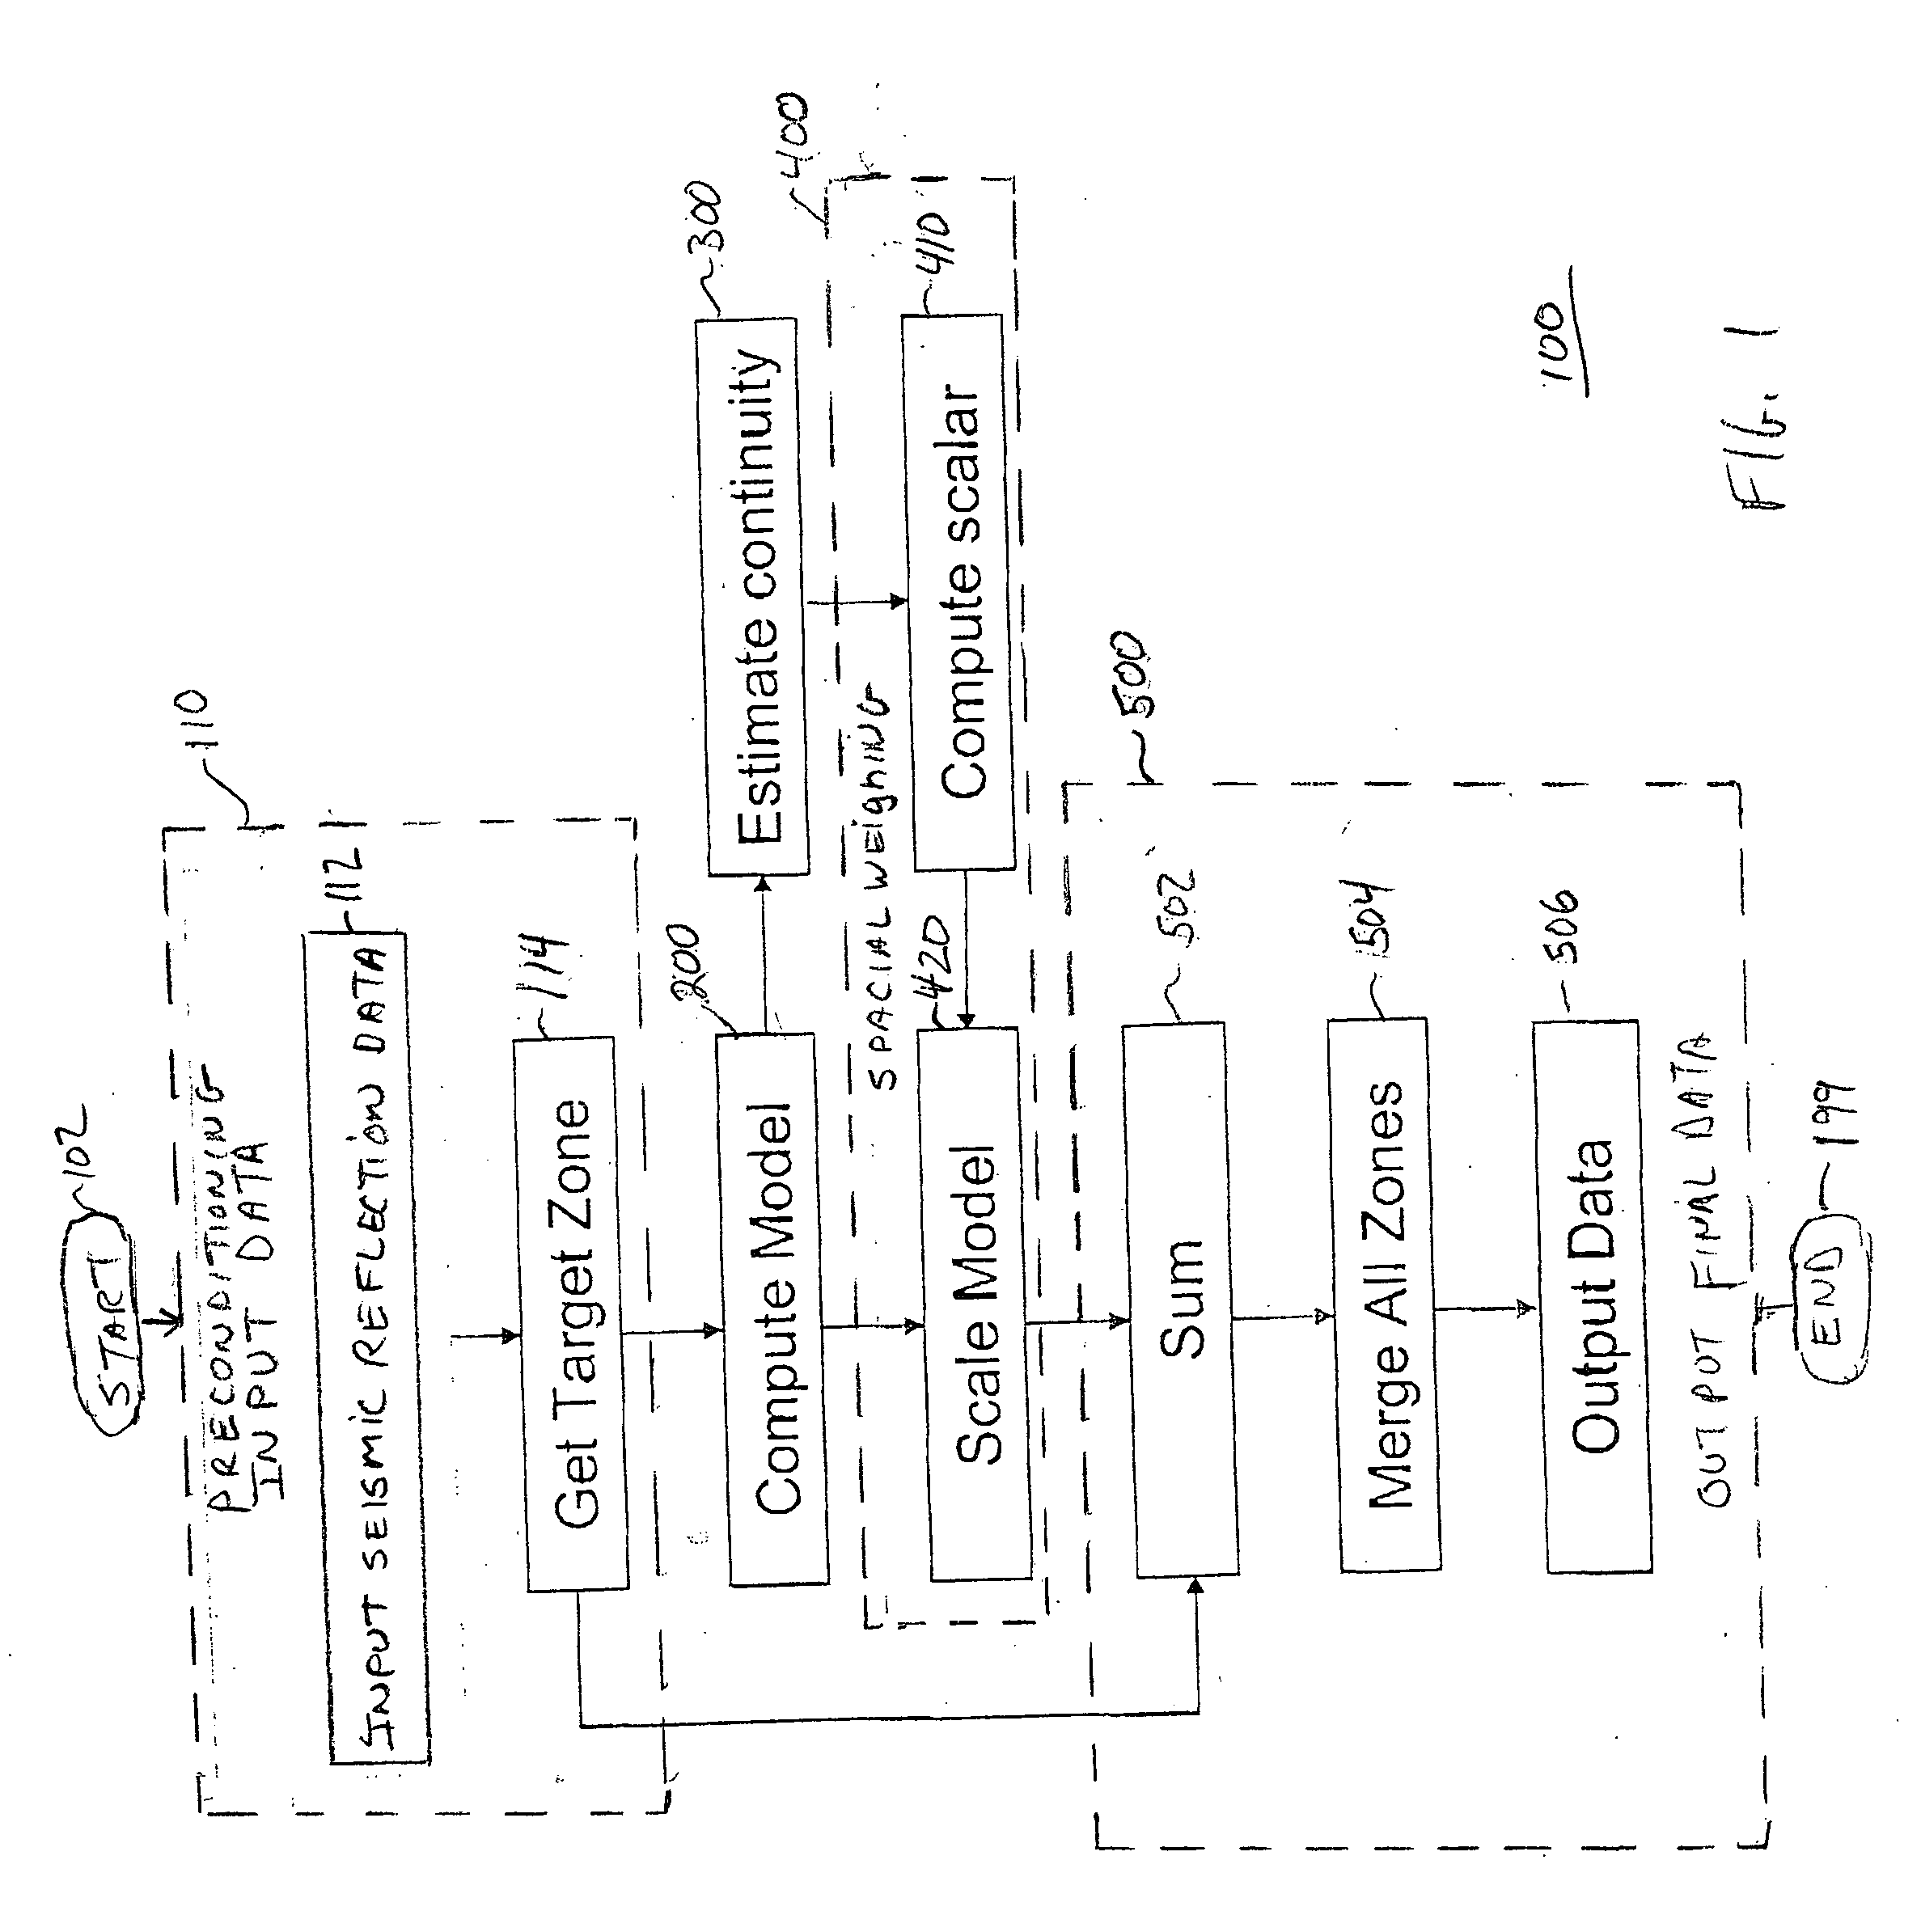 Method for estimating and reconstructing seismic reflection signals